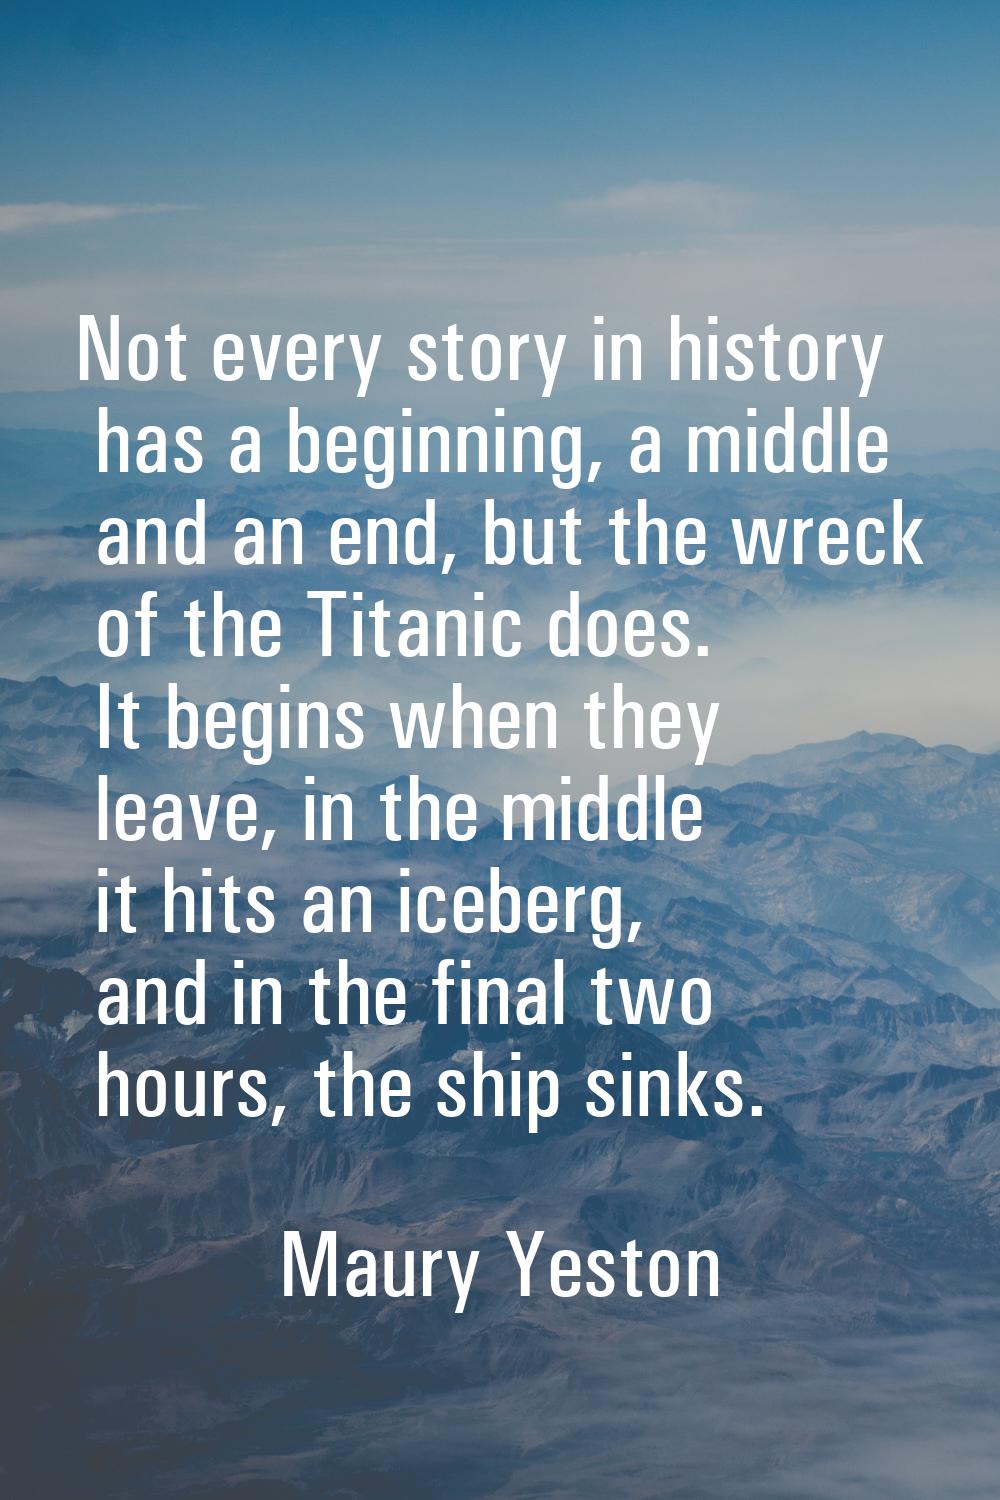 Not every story in history has a beginning, a middle and an end, but the wreck of the Titanic does.